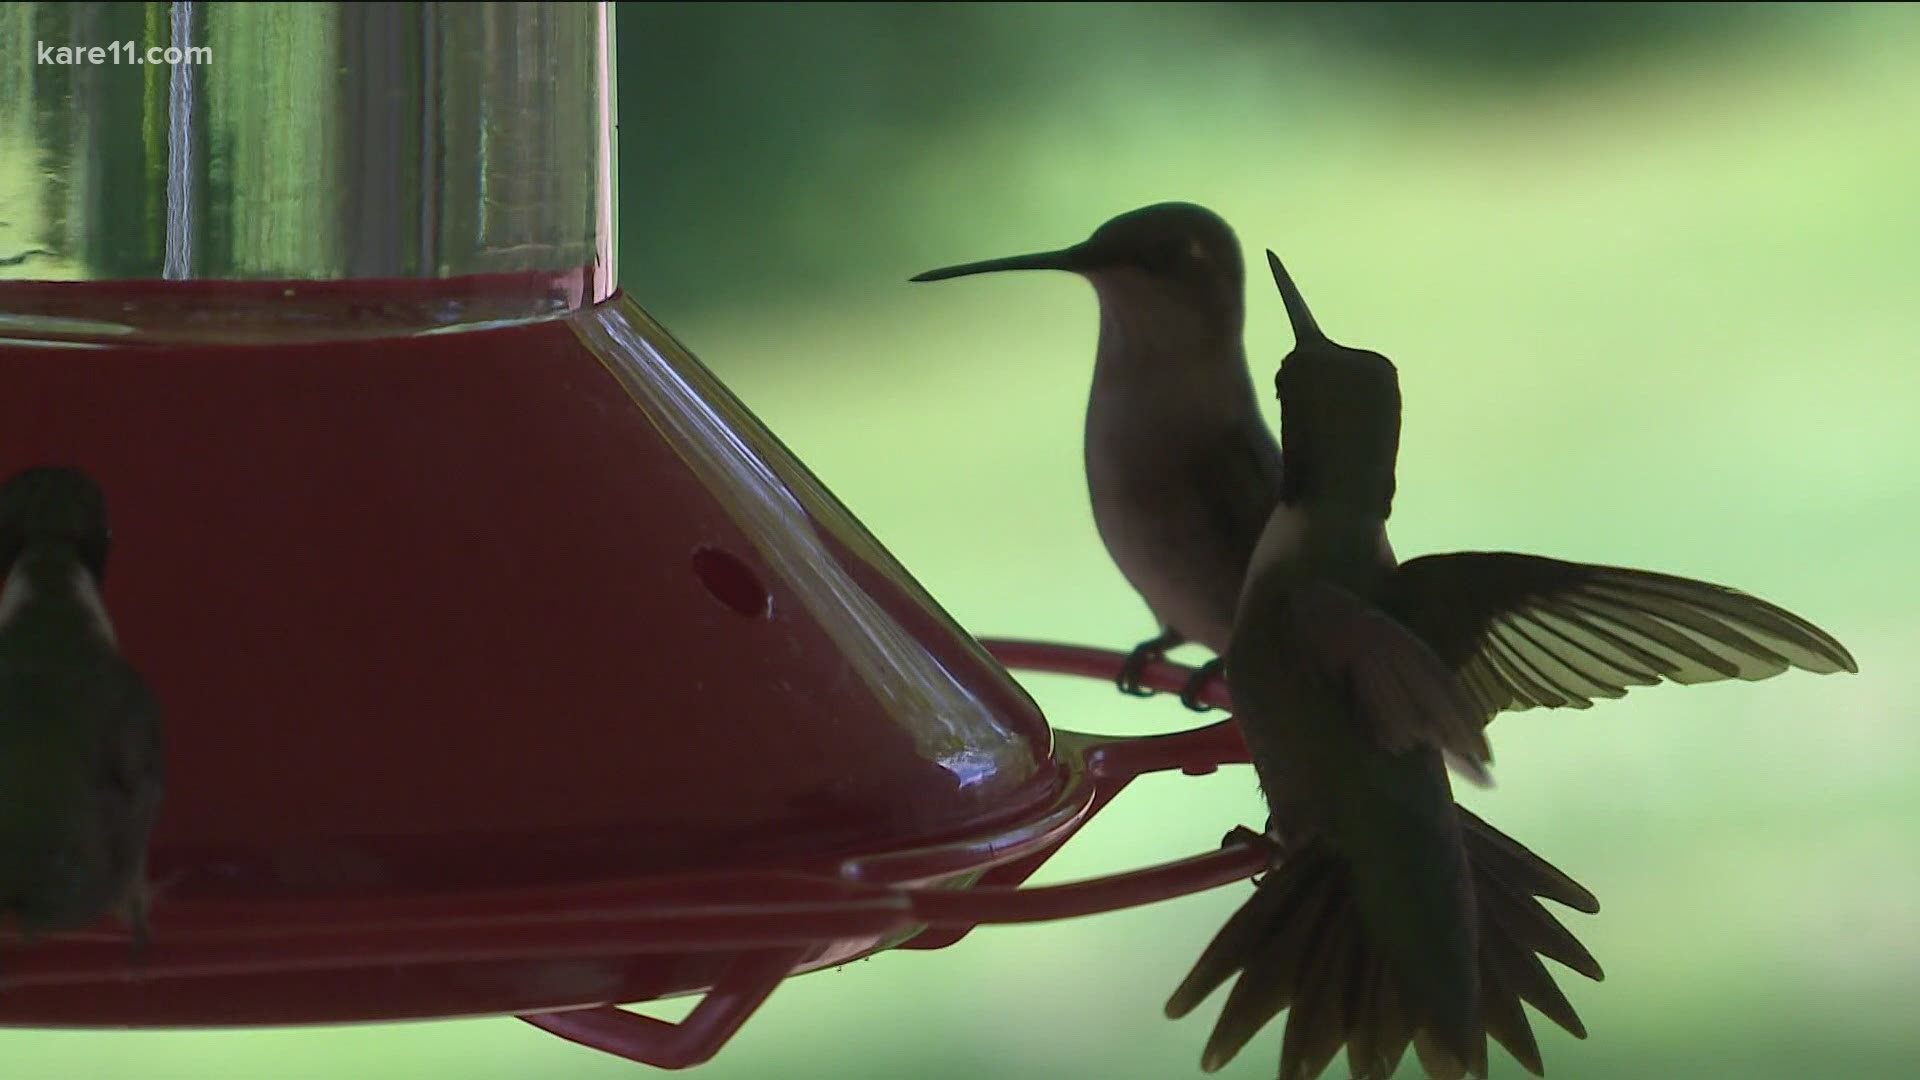 Hummingbirds have been reported in all corners of Minnesota this season.